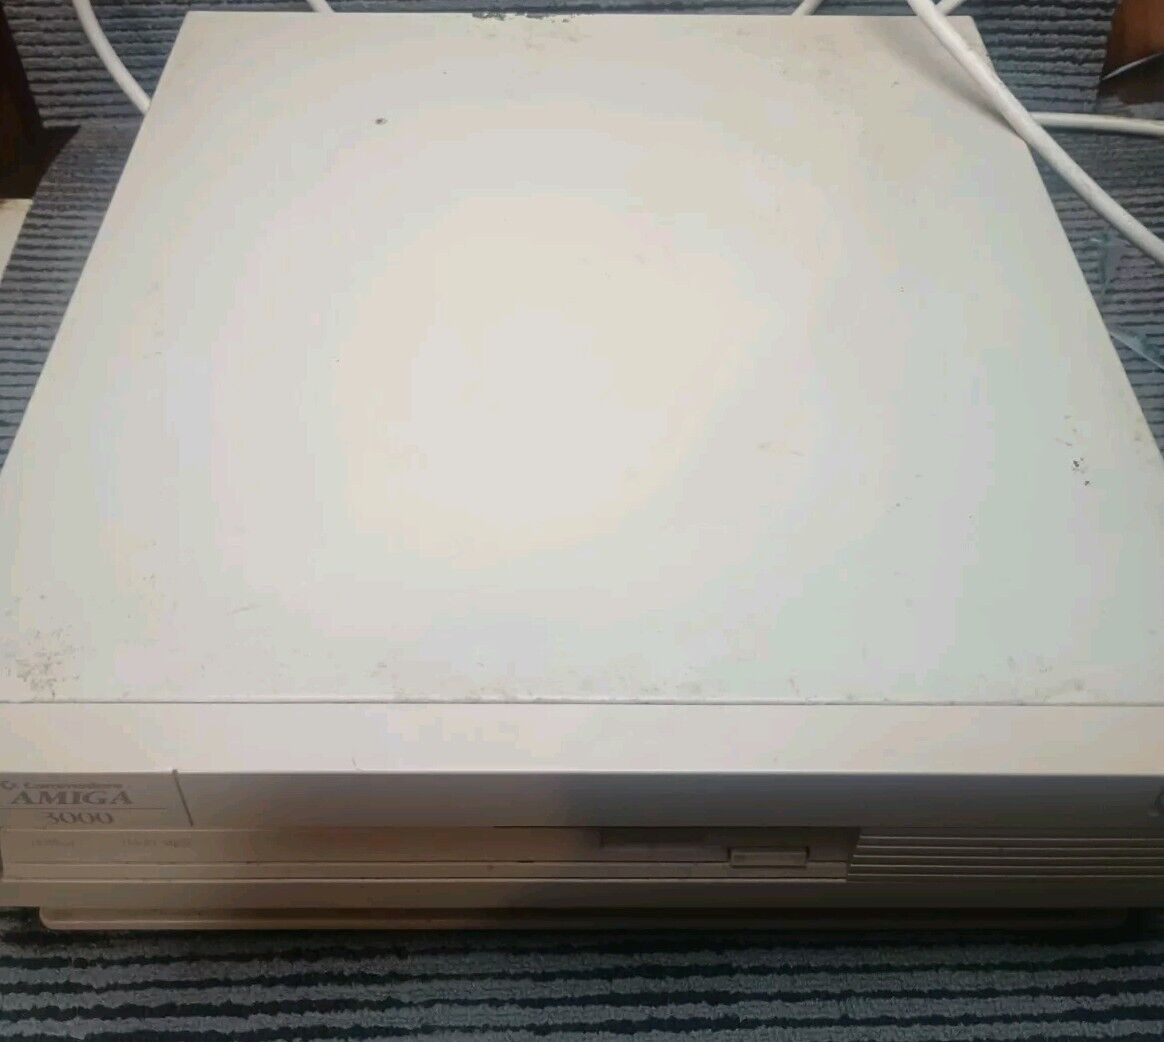 Commodore Amiga 3000 Computer For Parts/Not Working powers on selling as is part